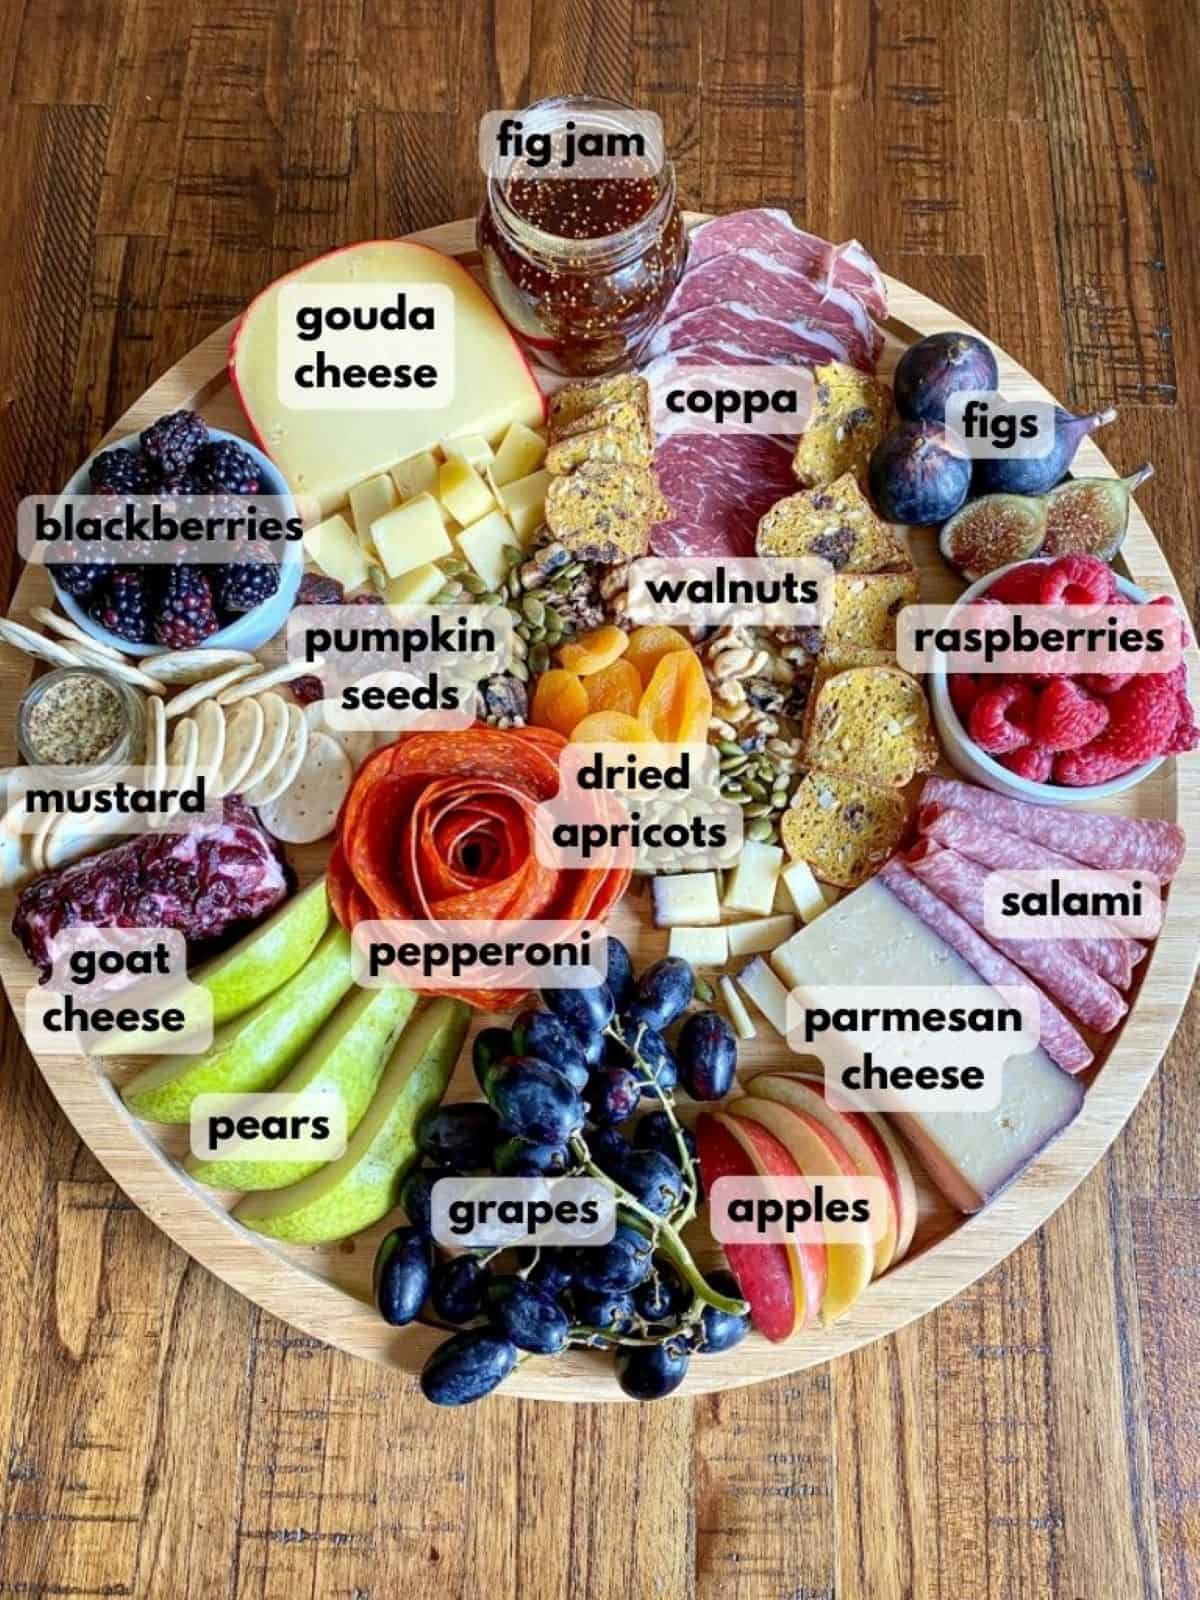 A large round wooden board full of cheese, meat, and fruit. Each ingredient is labeled with black text.